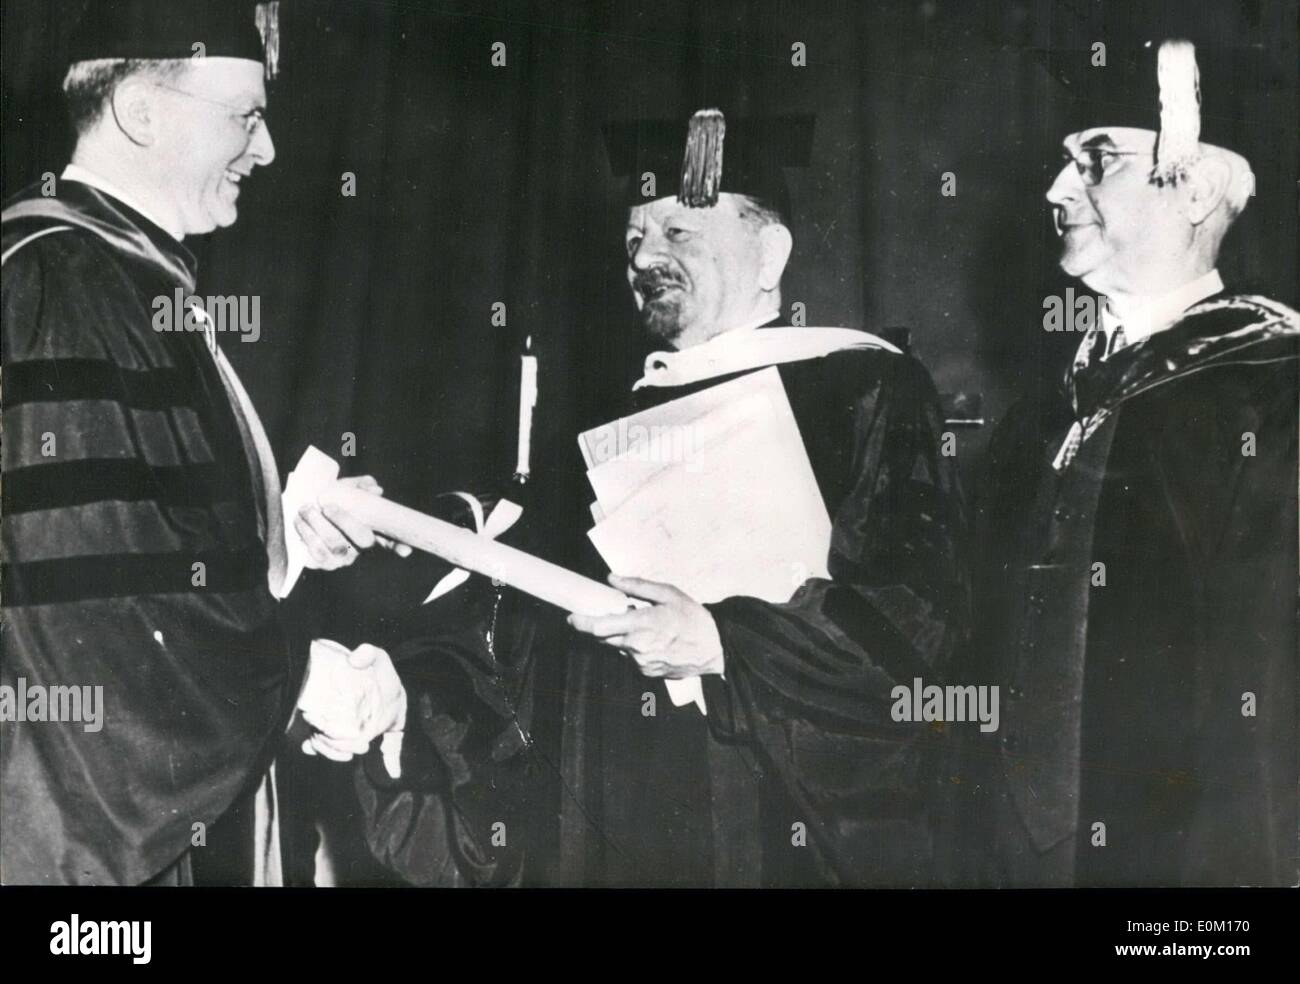 Jan. 07, 1953 - Berlin bishop Otto Dibelius got an honorary doctorate from Dr. Walter C. Langsam, the president of Gettysburg College in Pennsylvania, when he visited the United States. Stock Photo